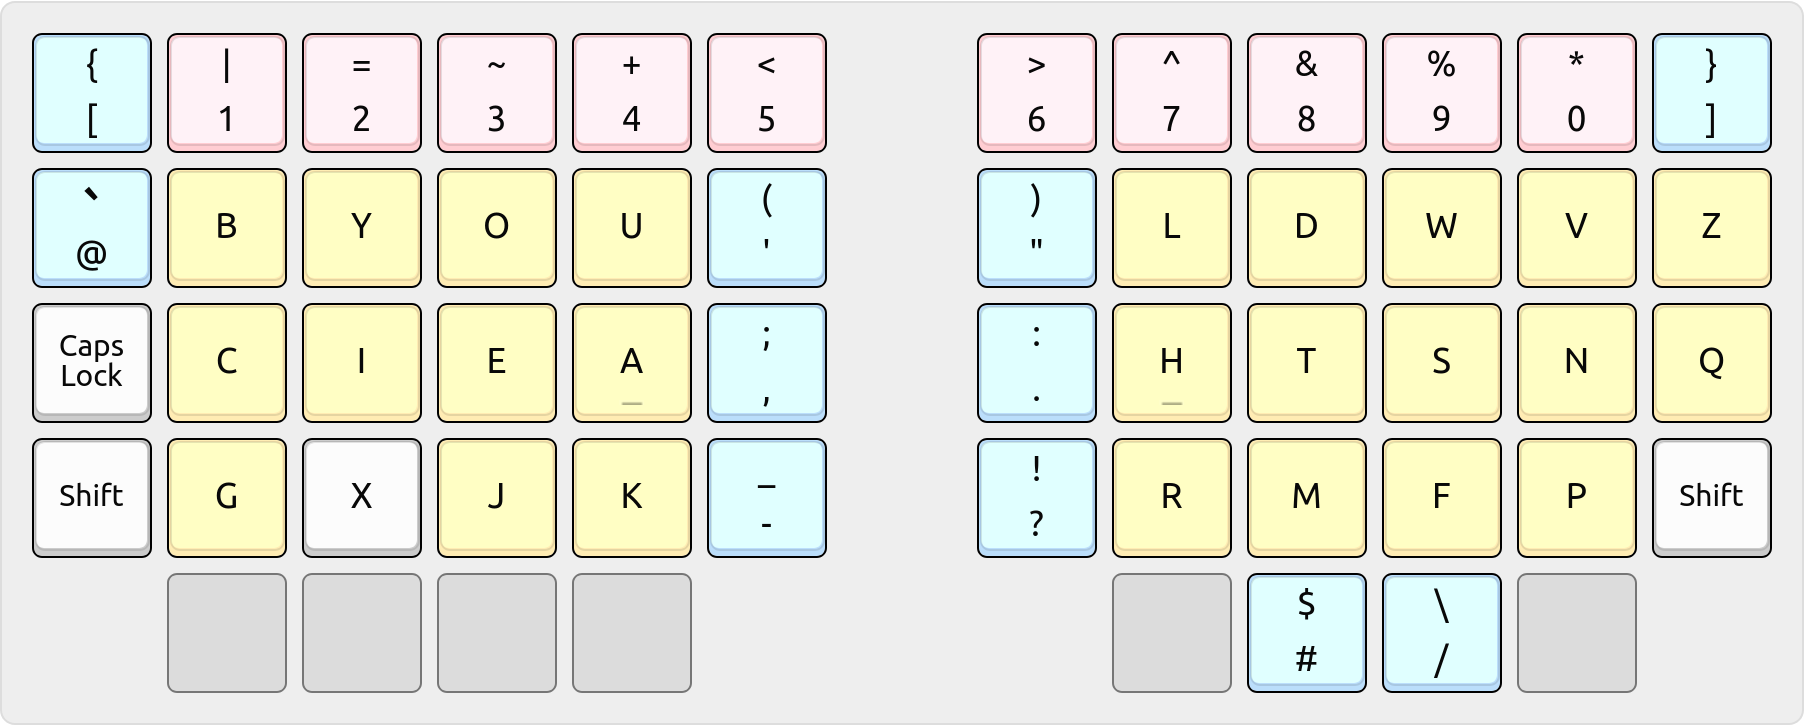 Rendering of this layout on an ergonomic keyboard.